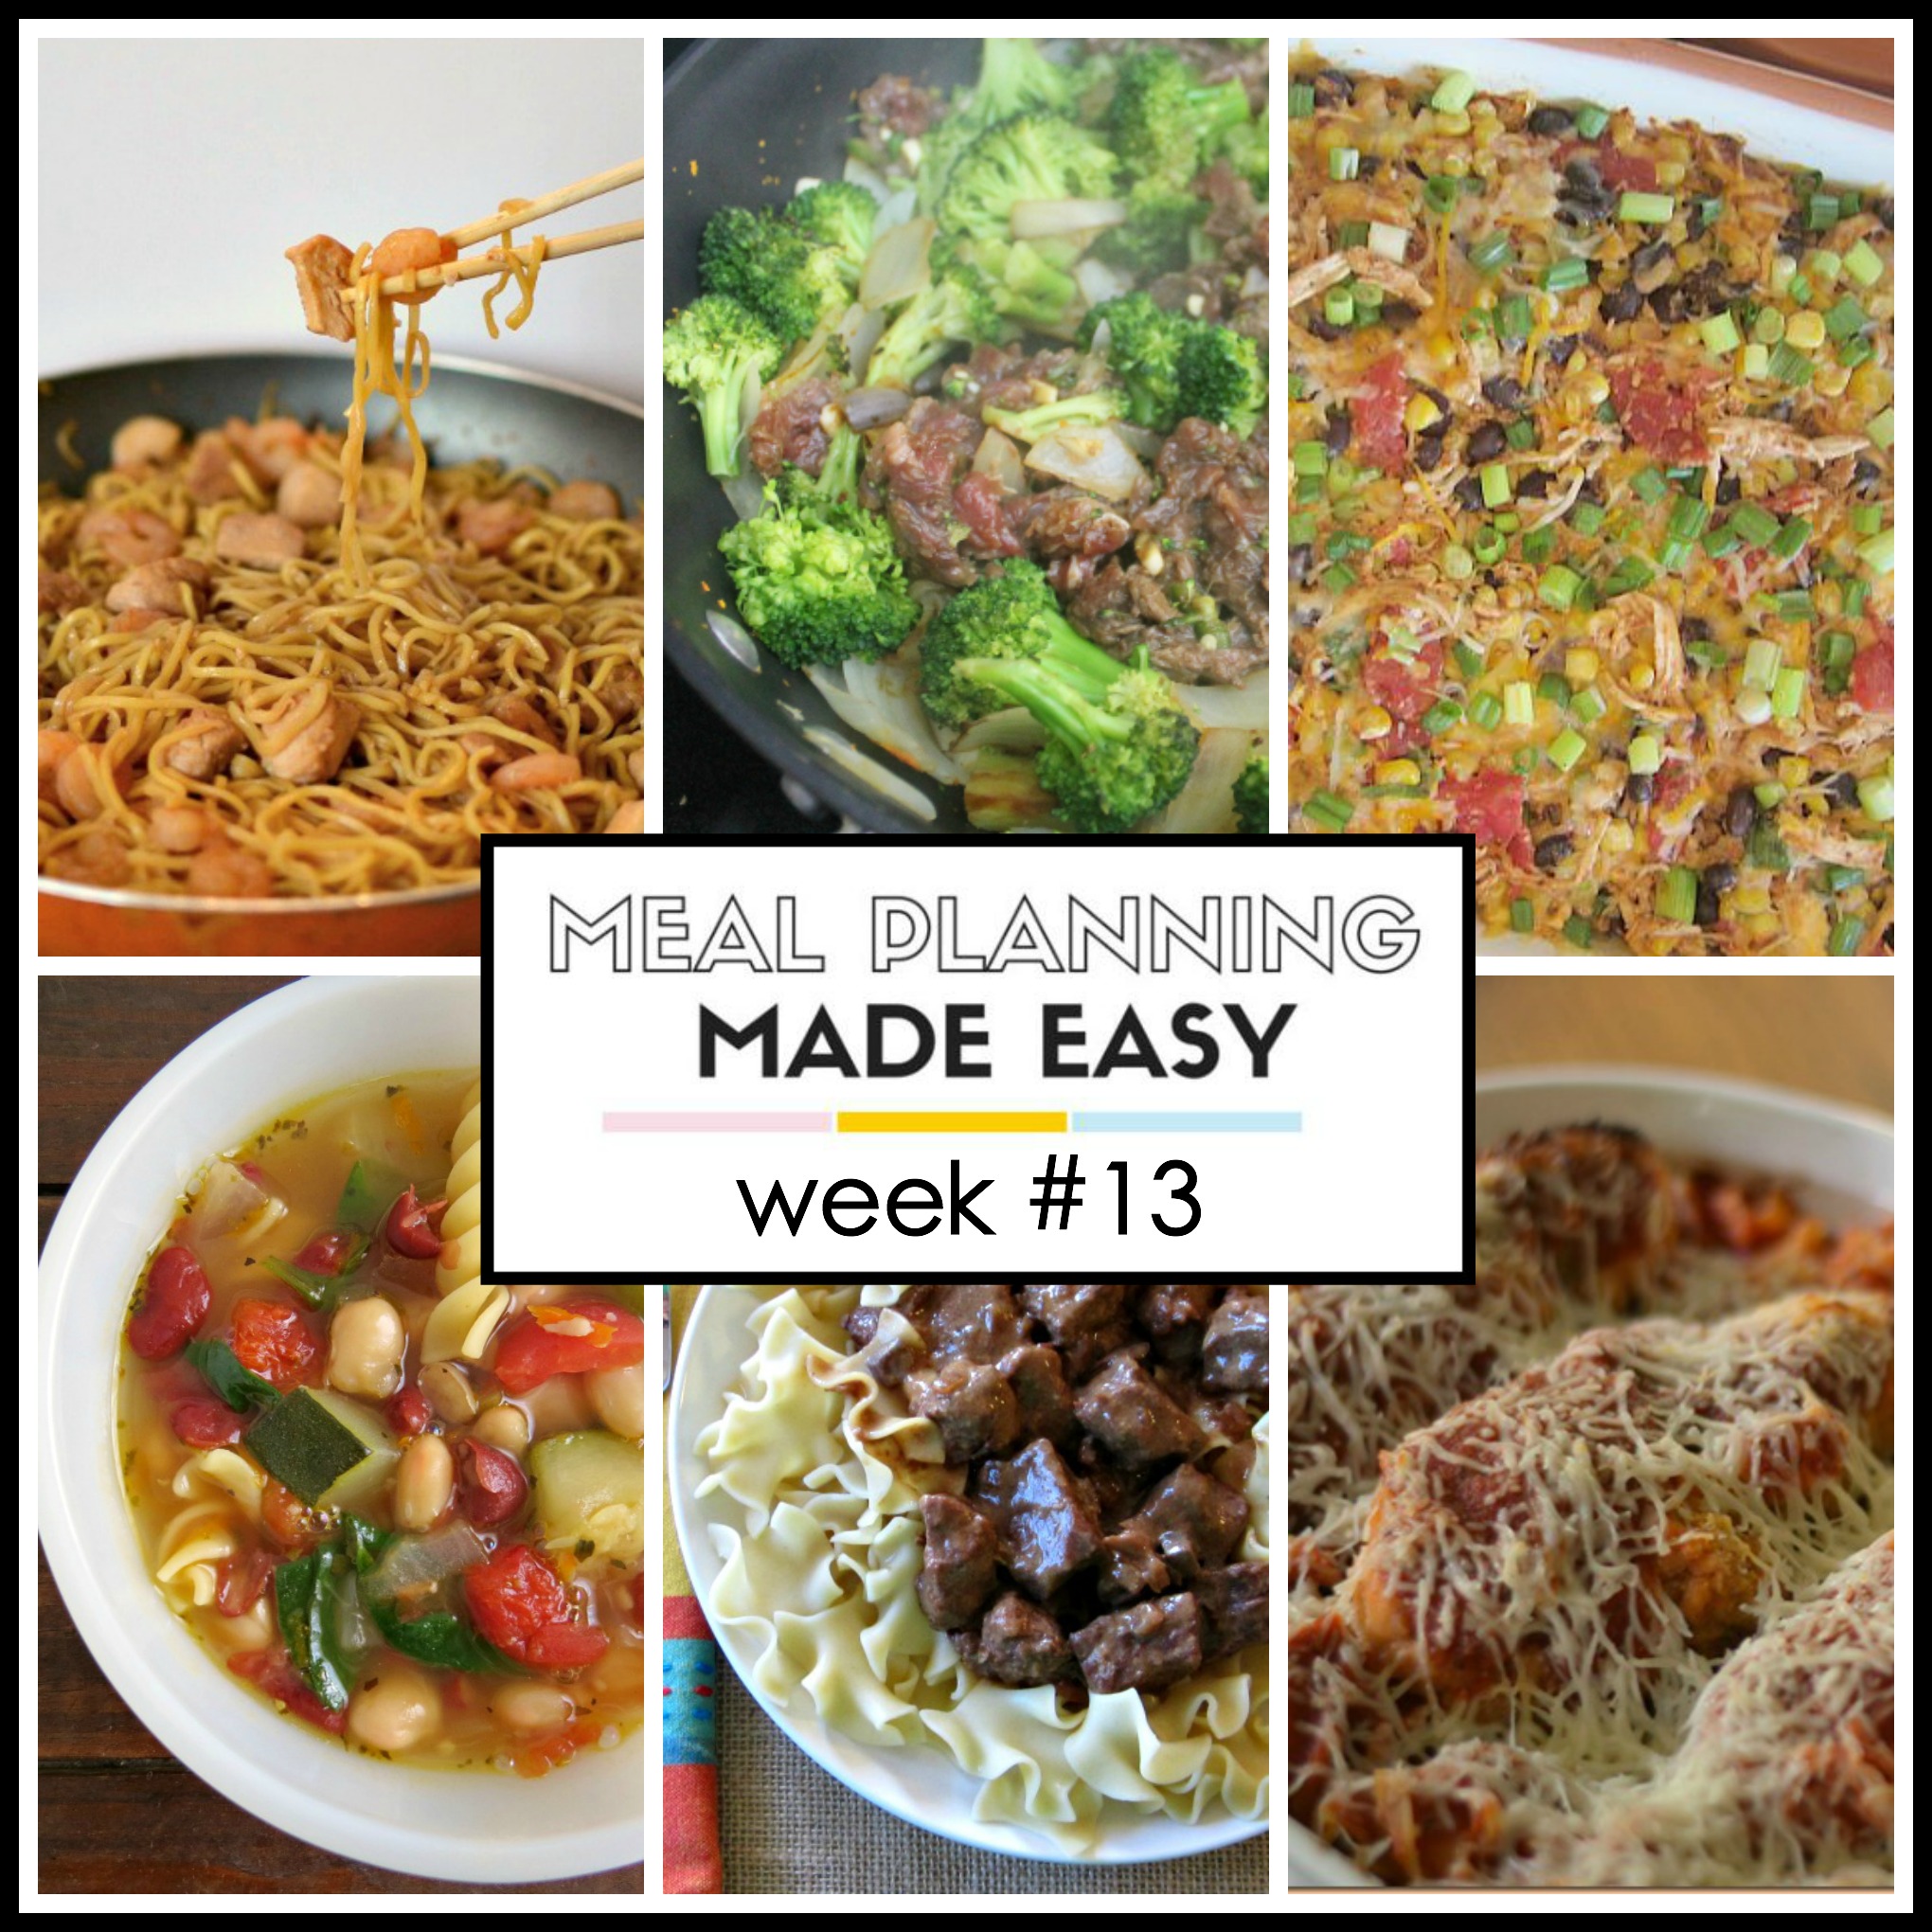 Meal Planning Made Easy Week #13 - Written Reality